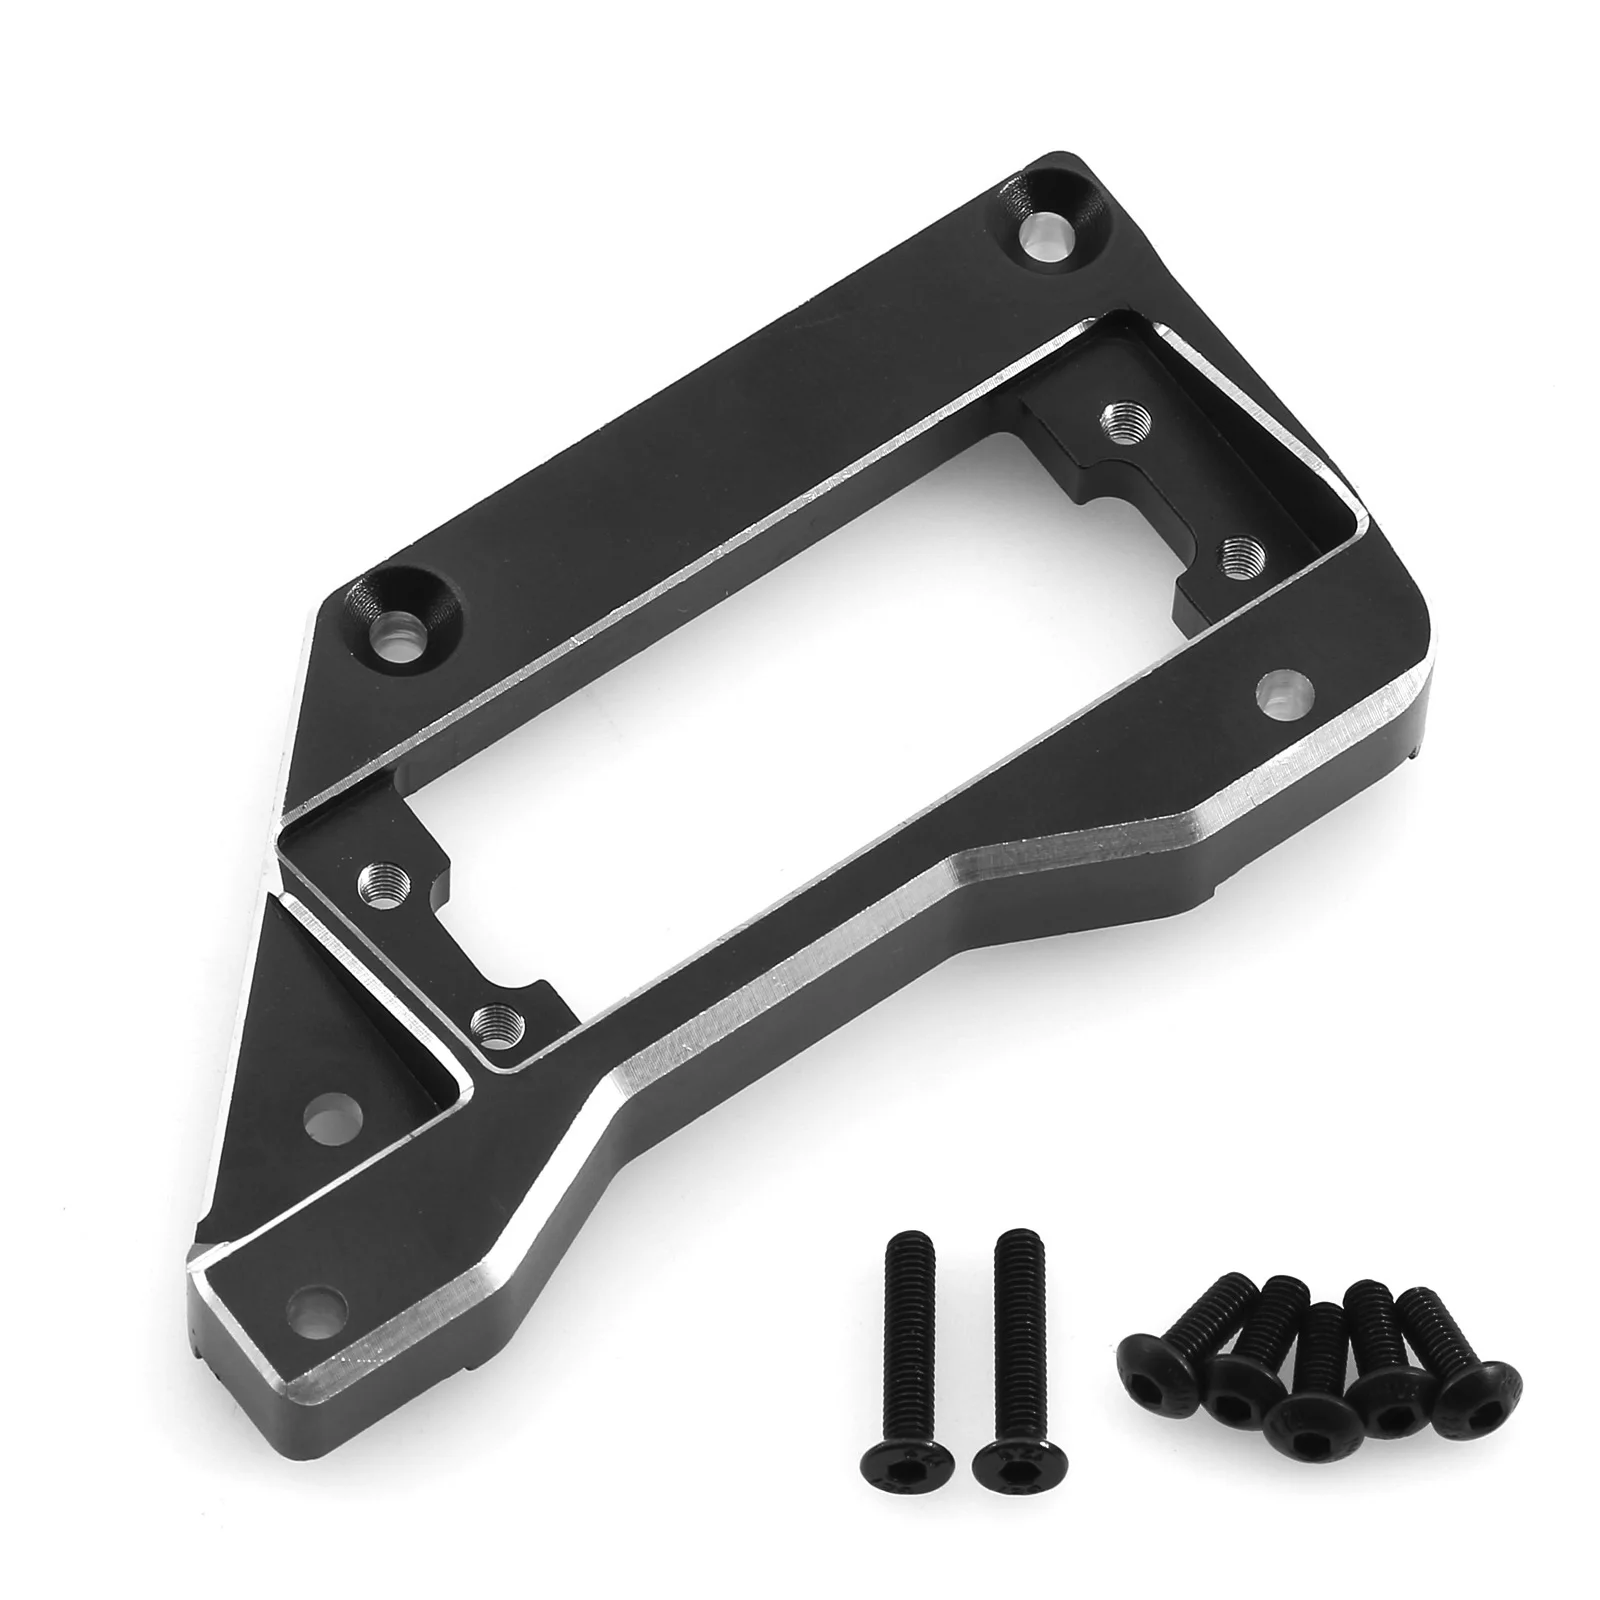 

Metal Servo On Axle Mount Servo Mount Stand for Axial SCX10 PRO 1/10 RC Crawler Car Upgrade Parts Accessories